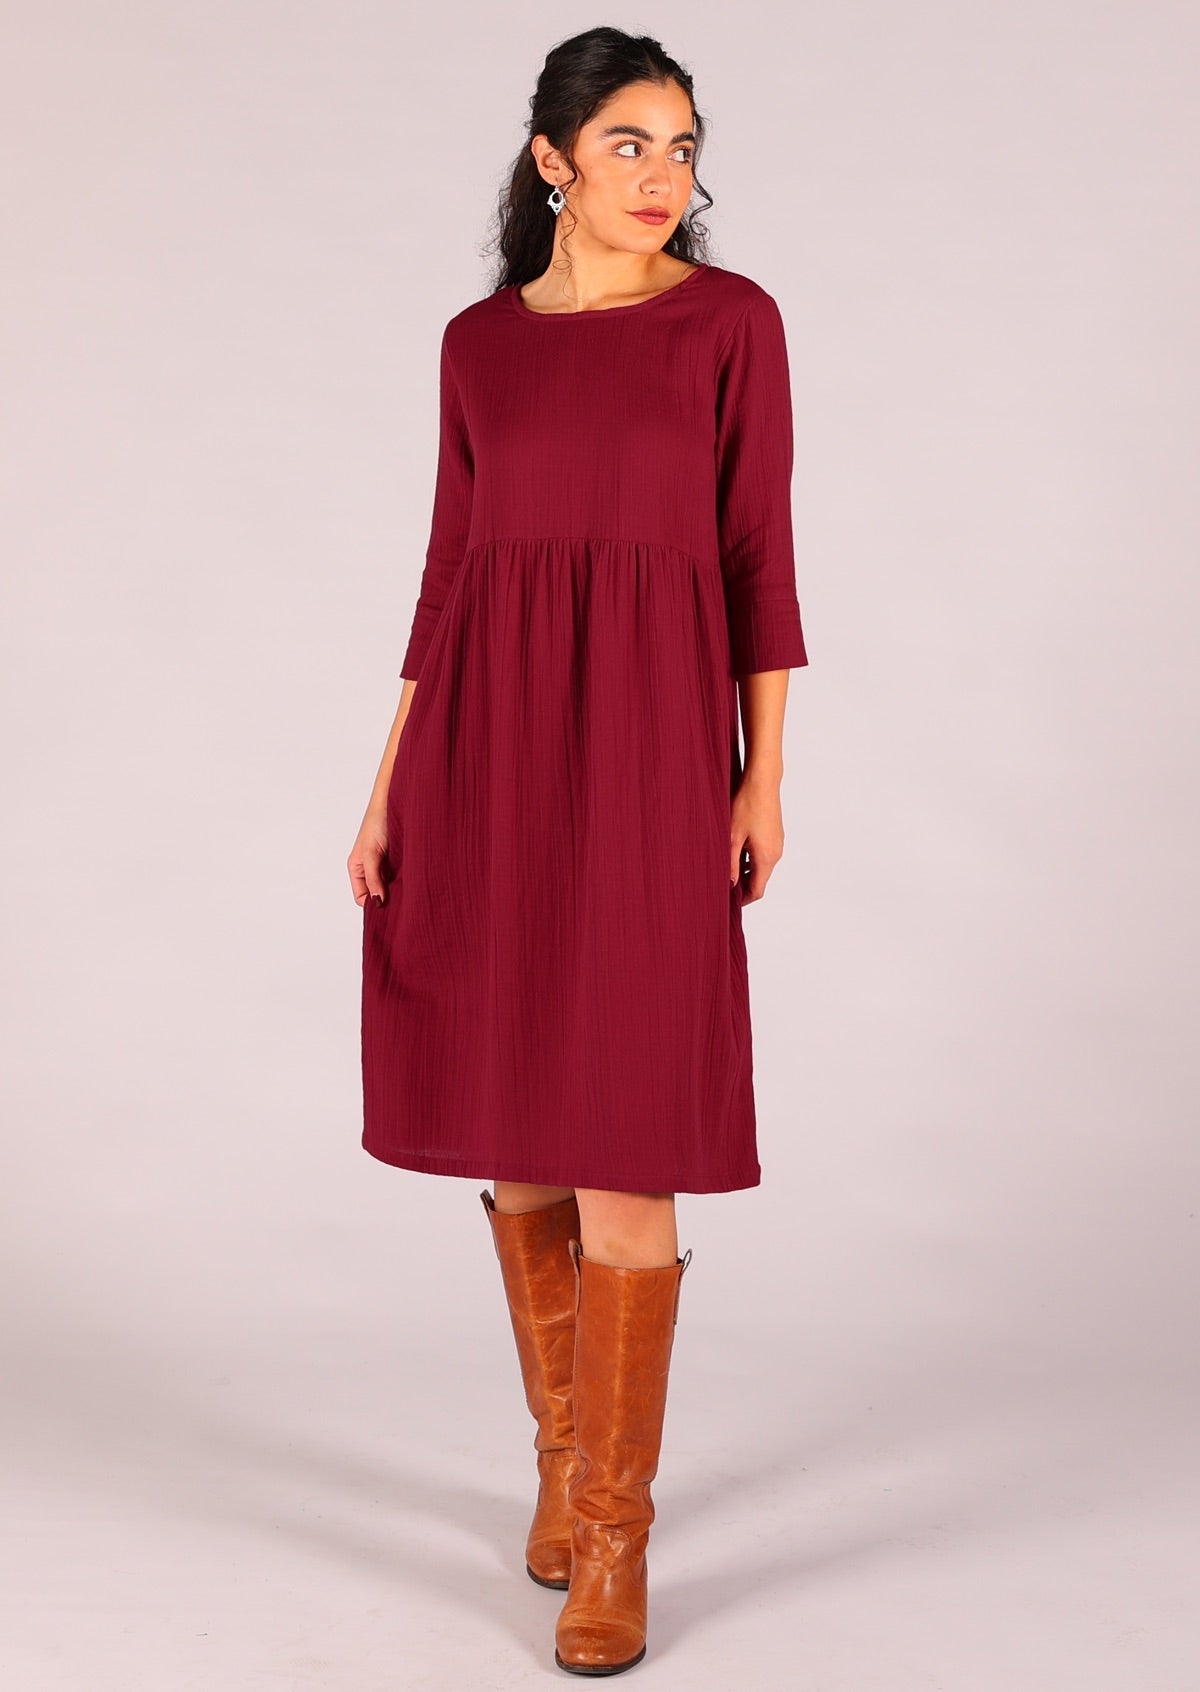 Comfort and style in this relaxed fit cotton gauze dress with 3/4 sleeves